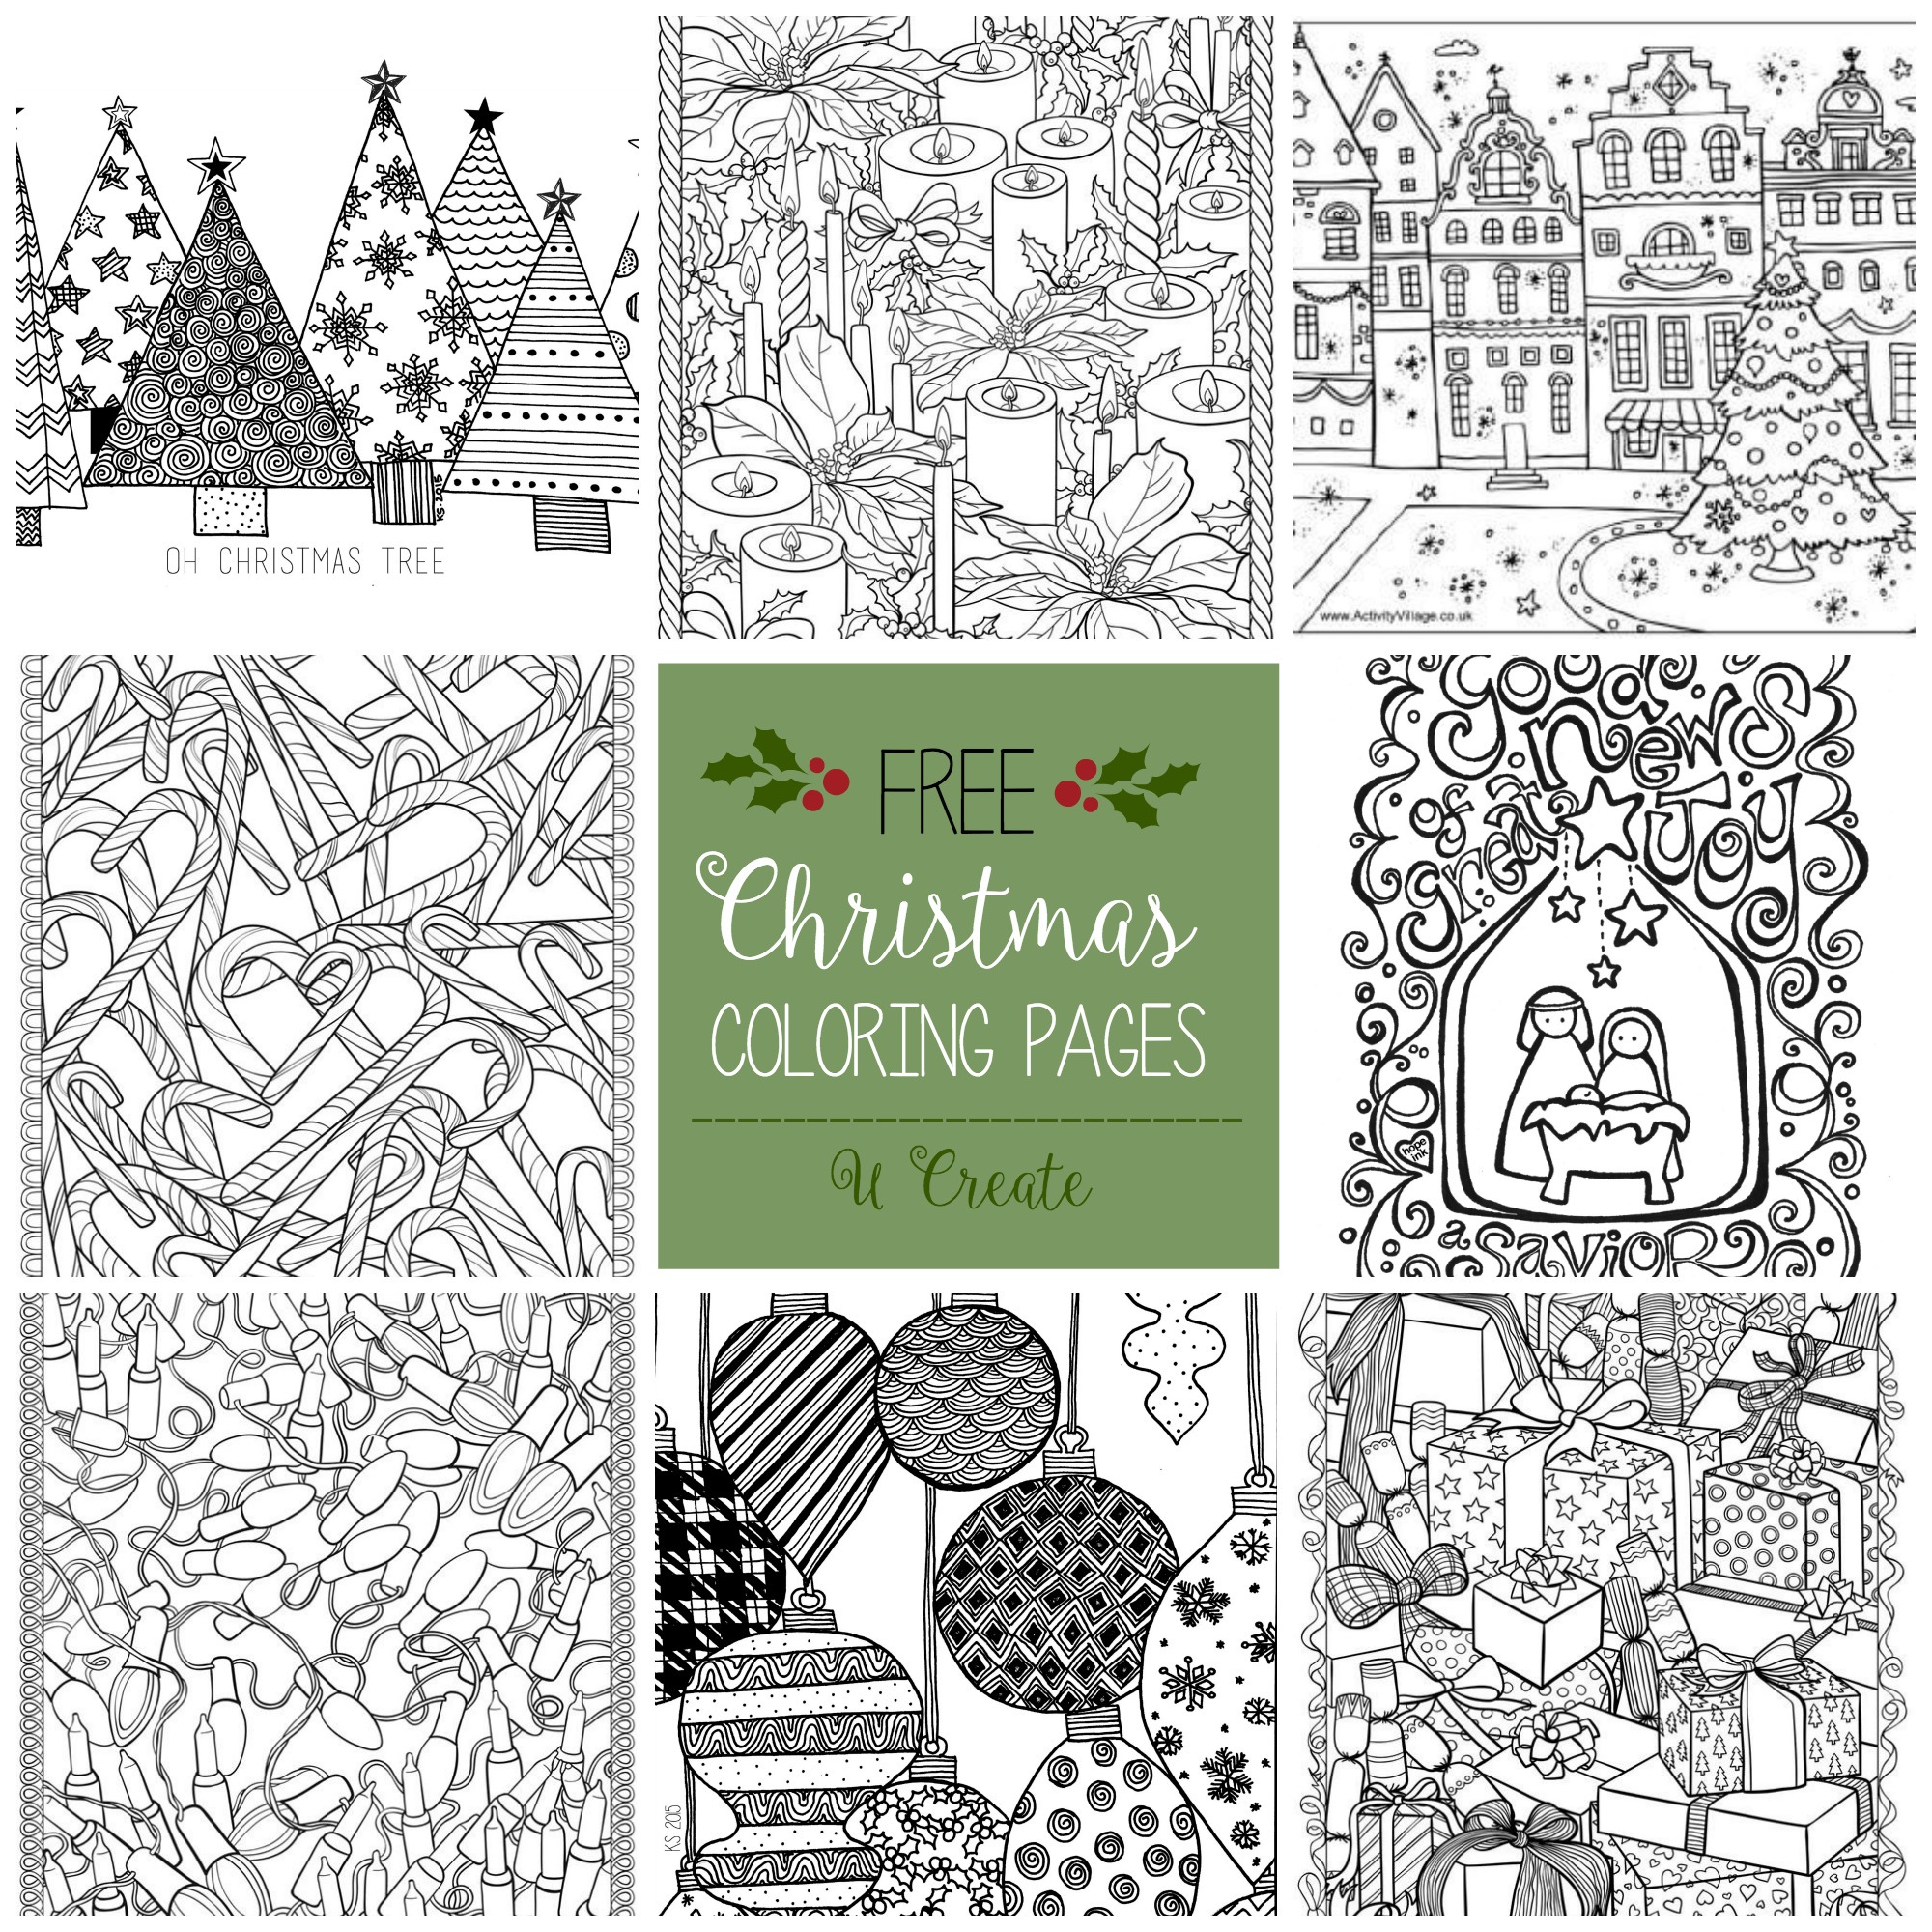 Christmas Coloring Pages Free Coloring Sheets for Adults and Kids